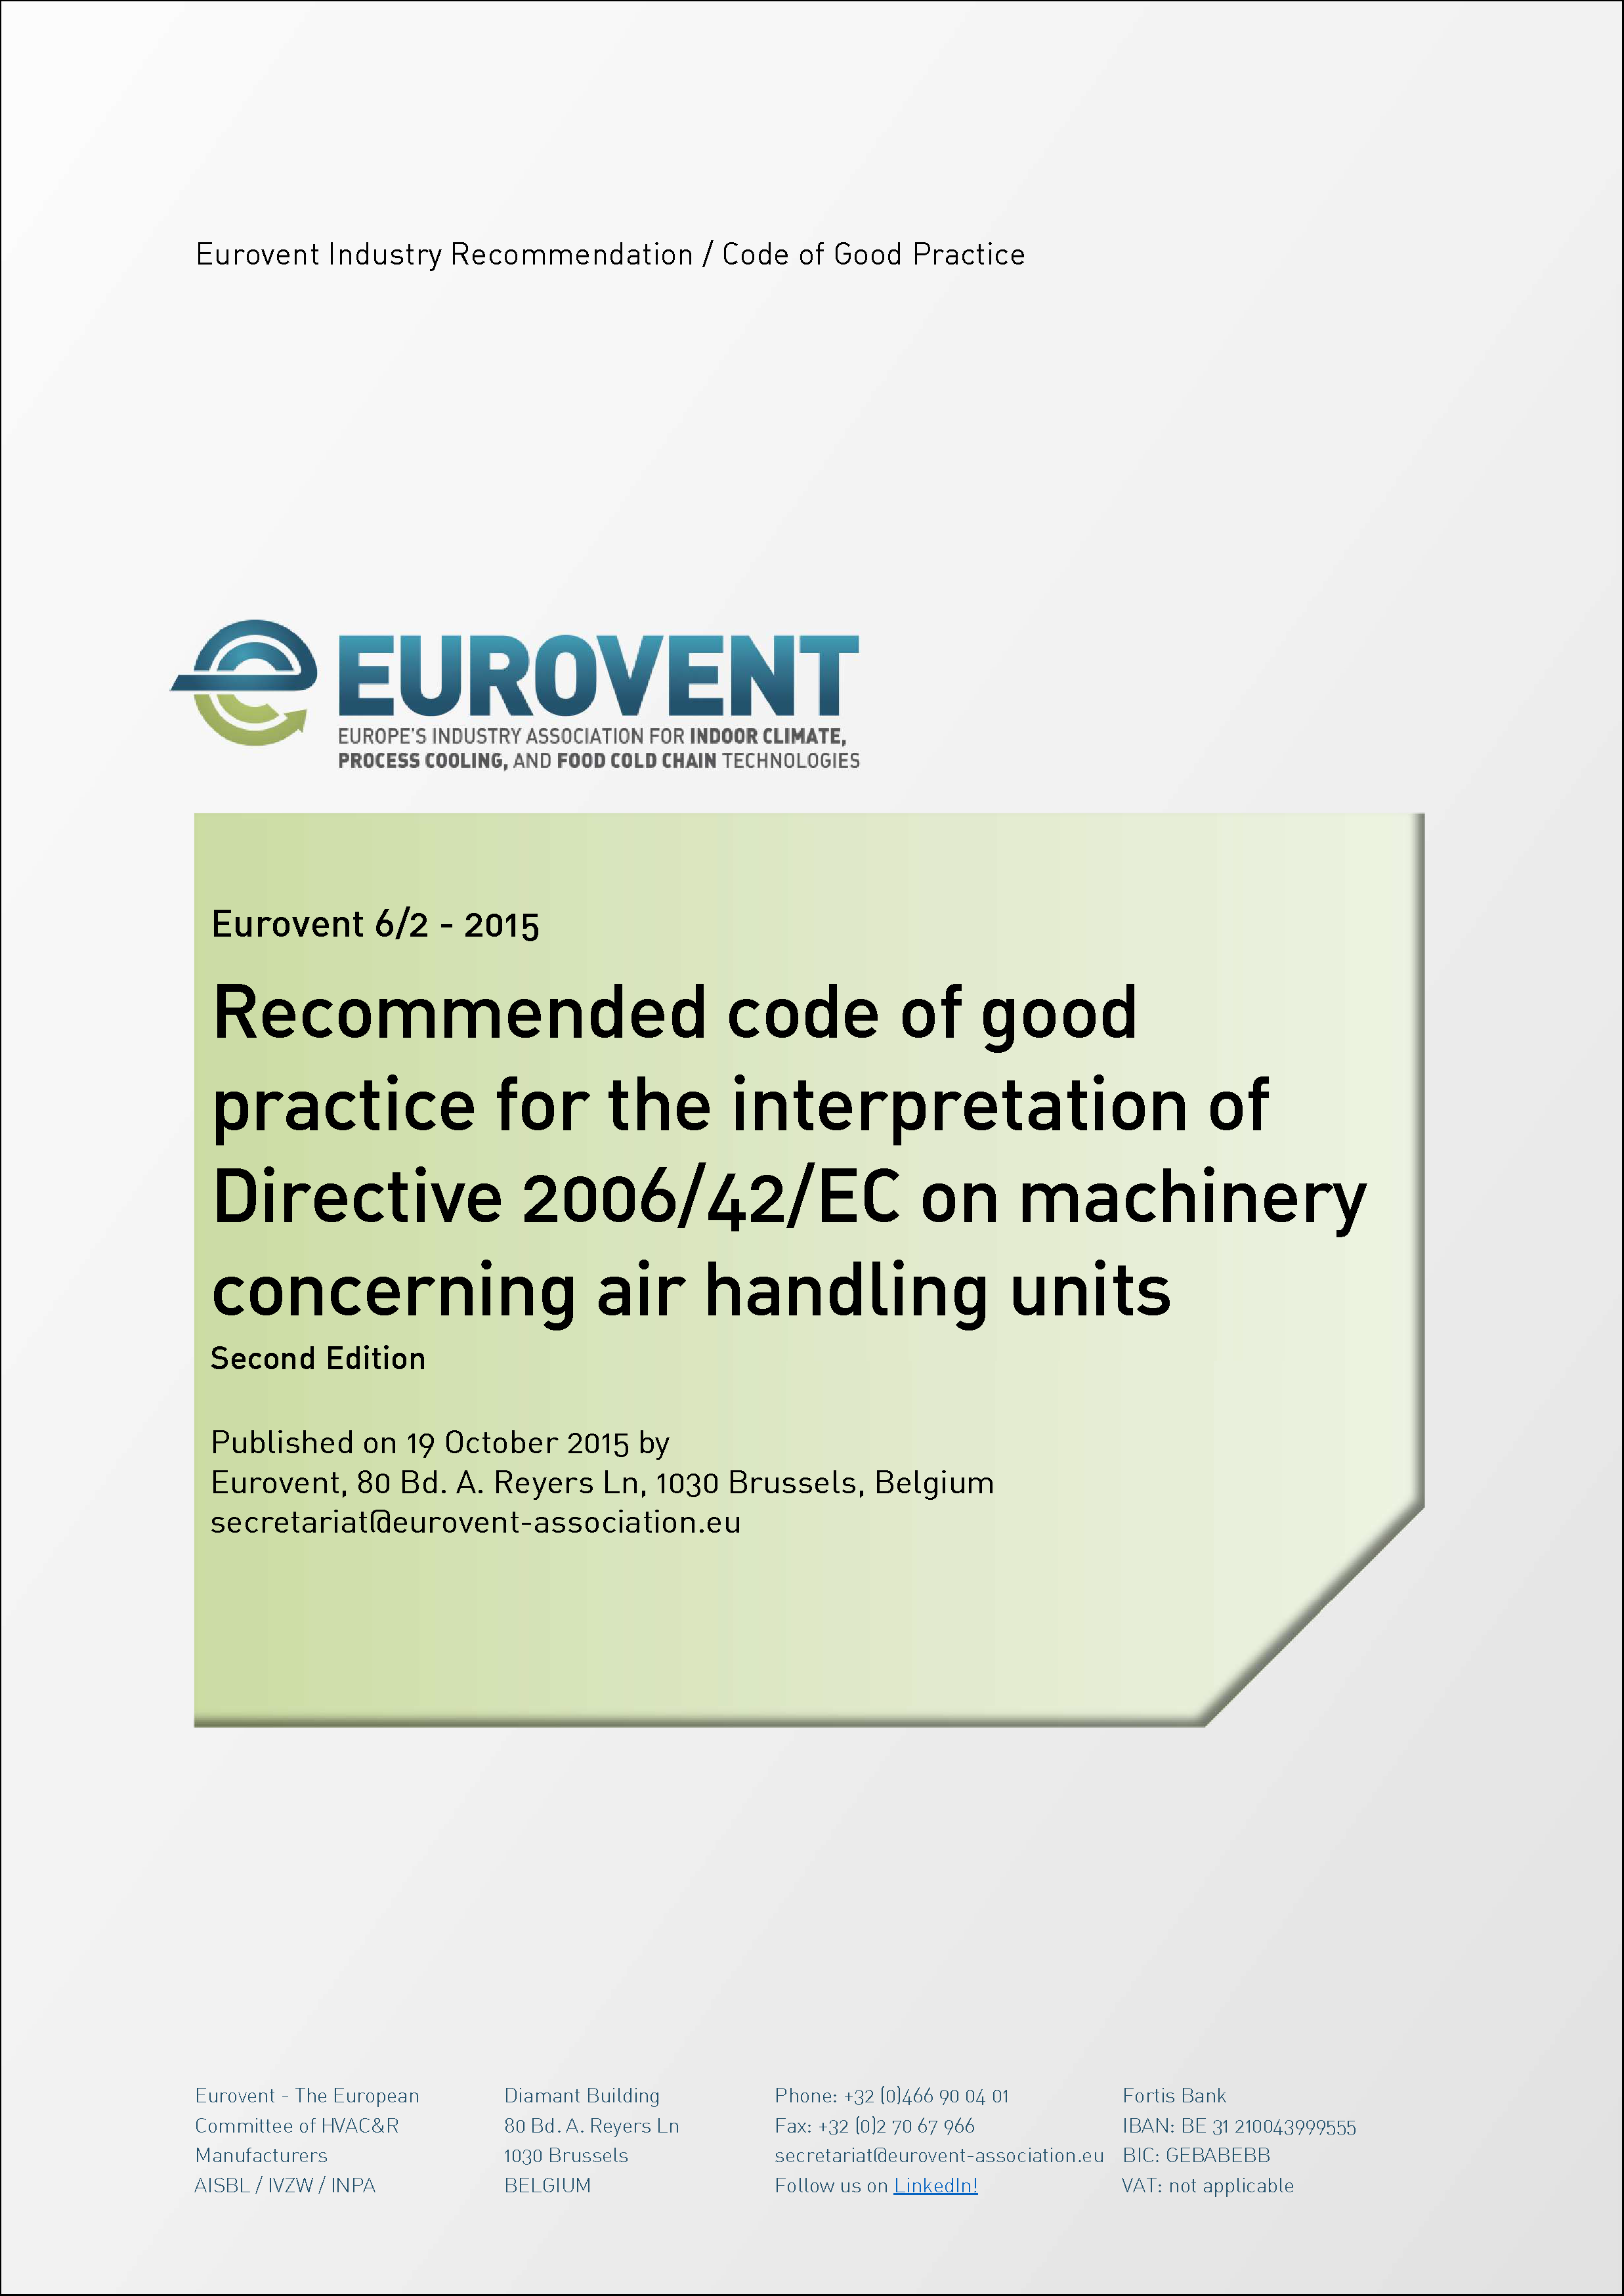 2015 - Recommended code of good practice for the interpretation of Directive 2006/42/EC on machinery concerning air handling units